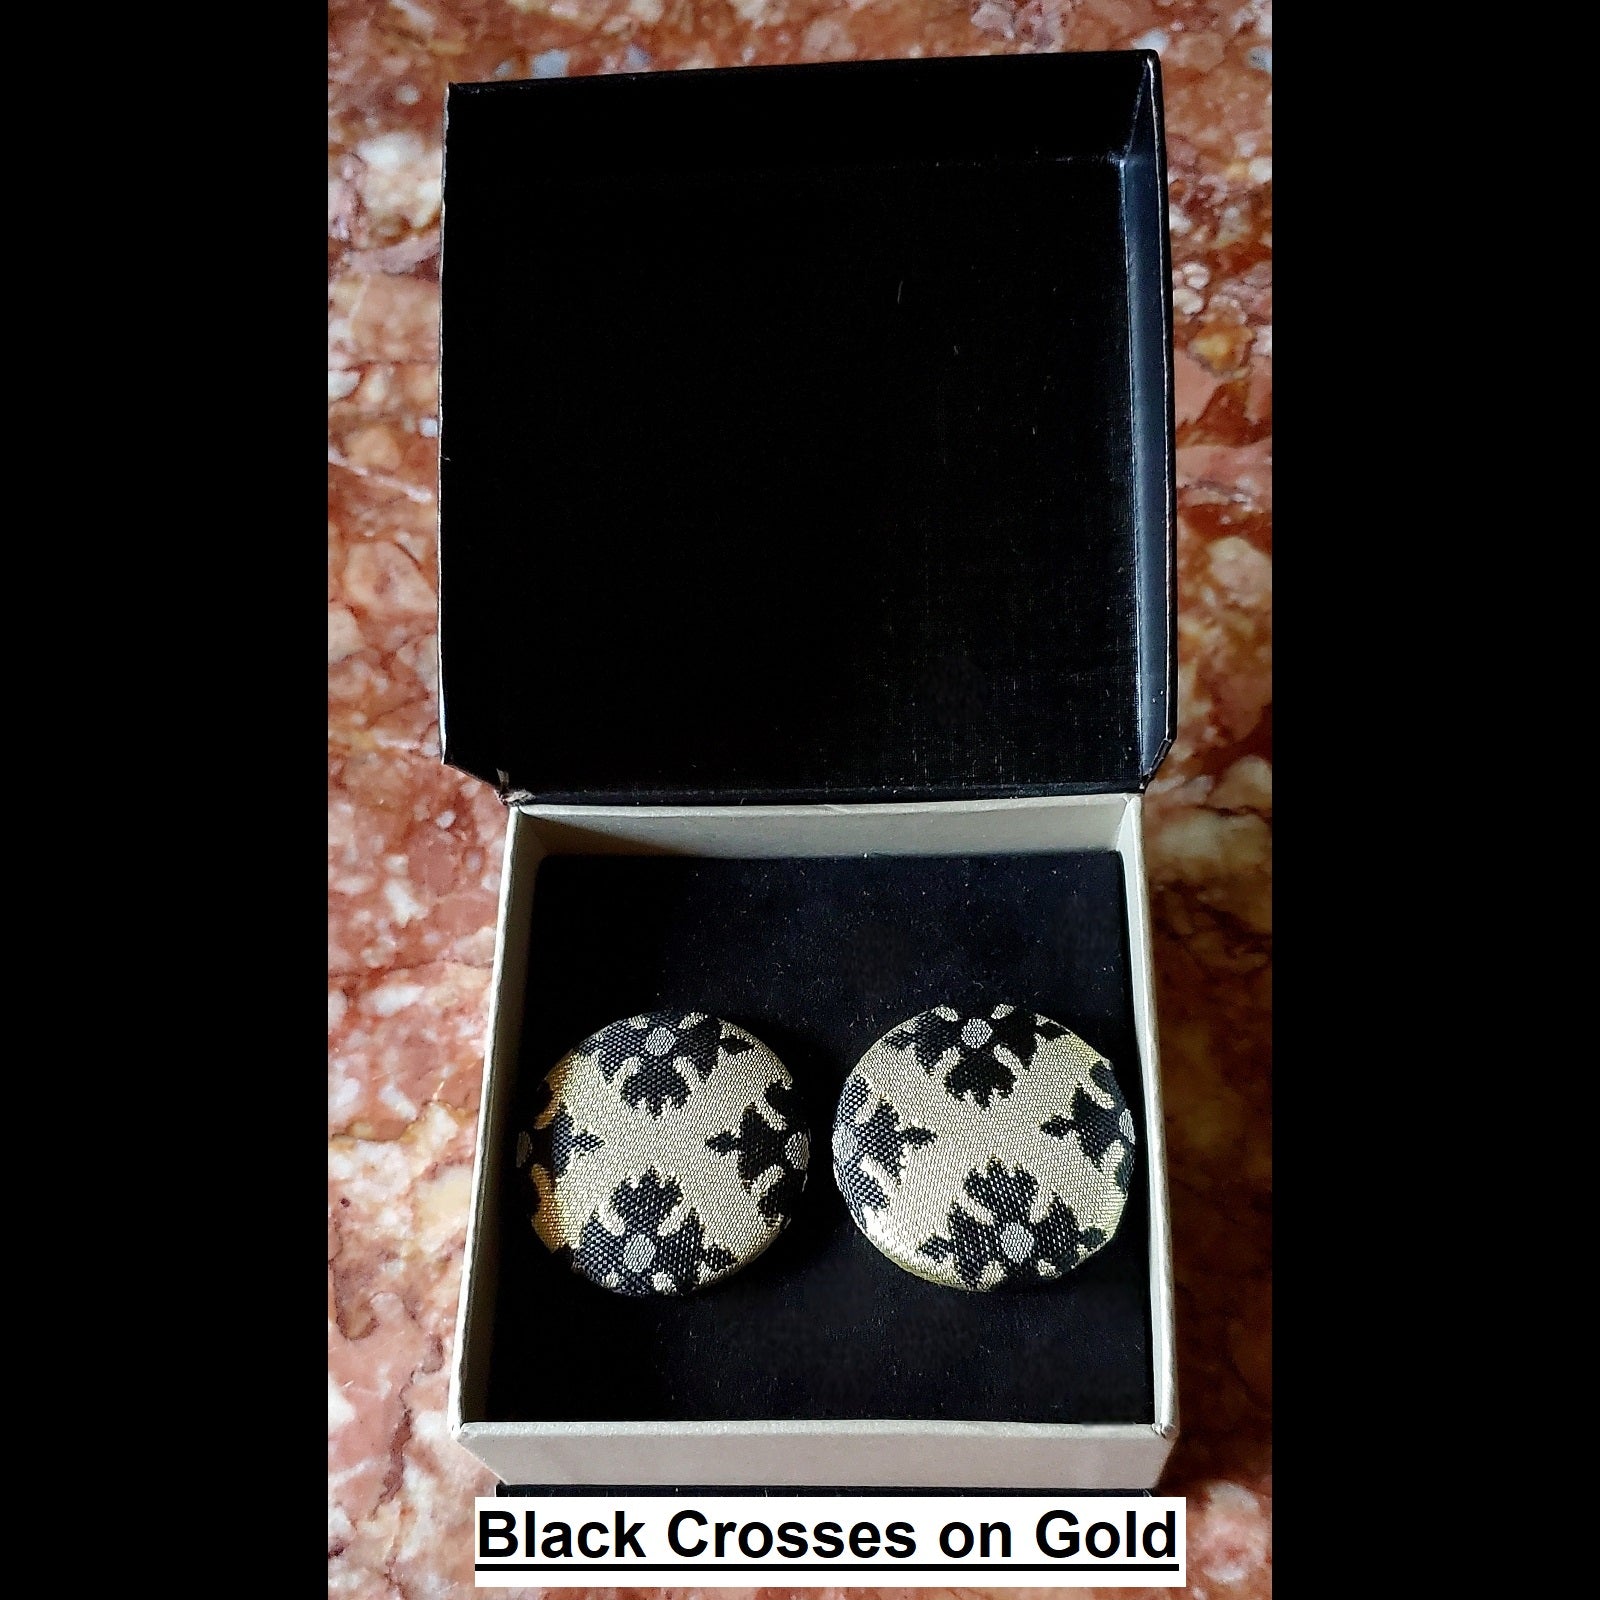 black crosses on gold print button earrings in jewelry box